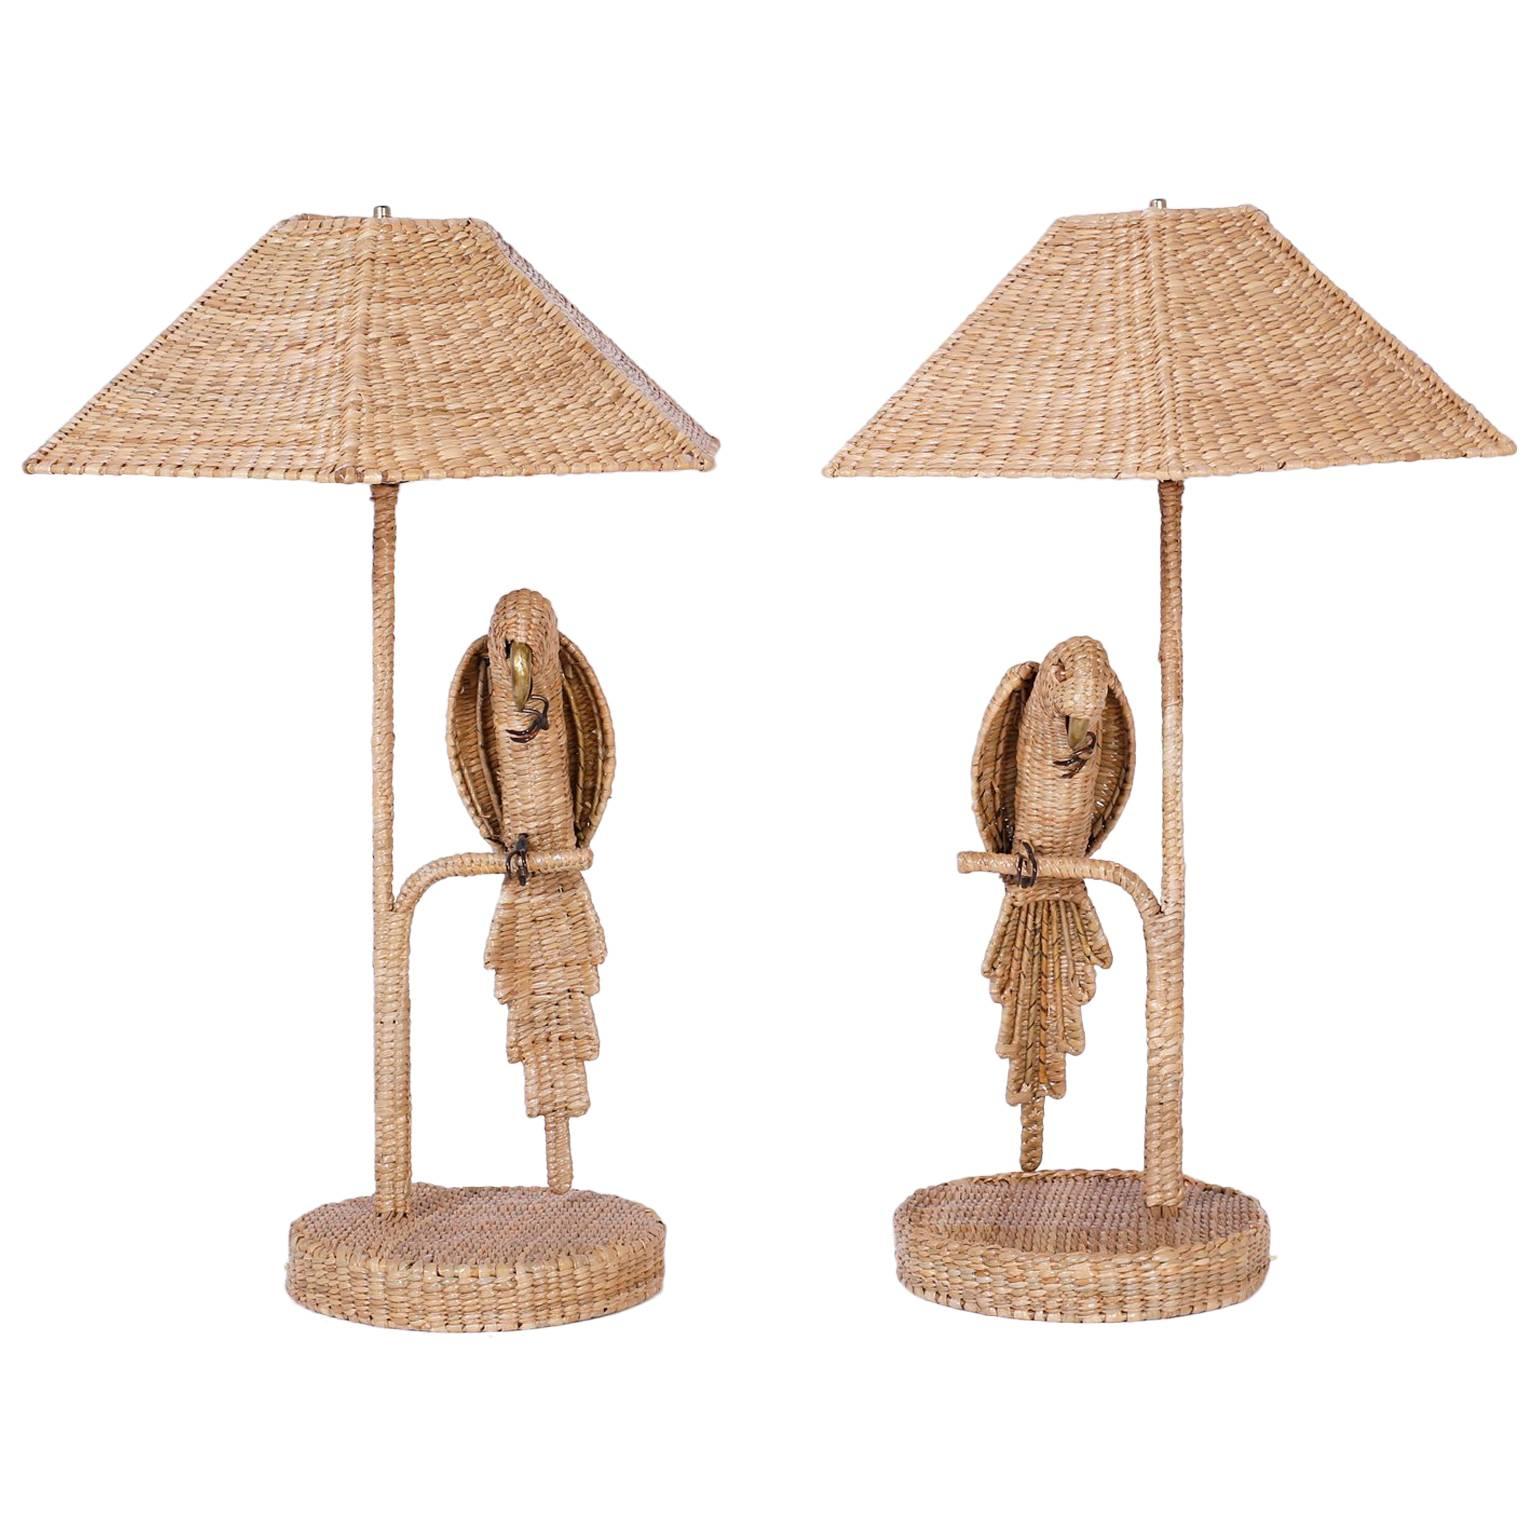 Whimsical pair of parrot or bird table lamps crafted with reed wrapped over a metal frame with a brass beak and copper eyes. Signed Mario Torres on a brass medallion and your choice of a wicker or linen shade.